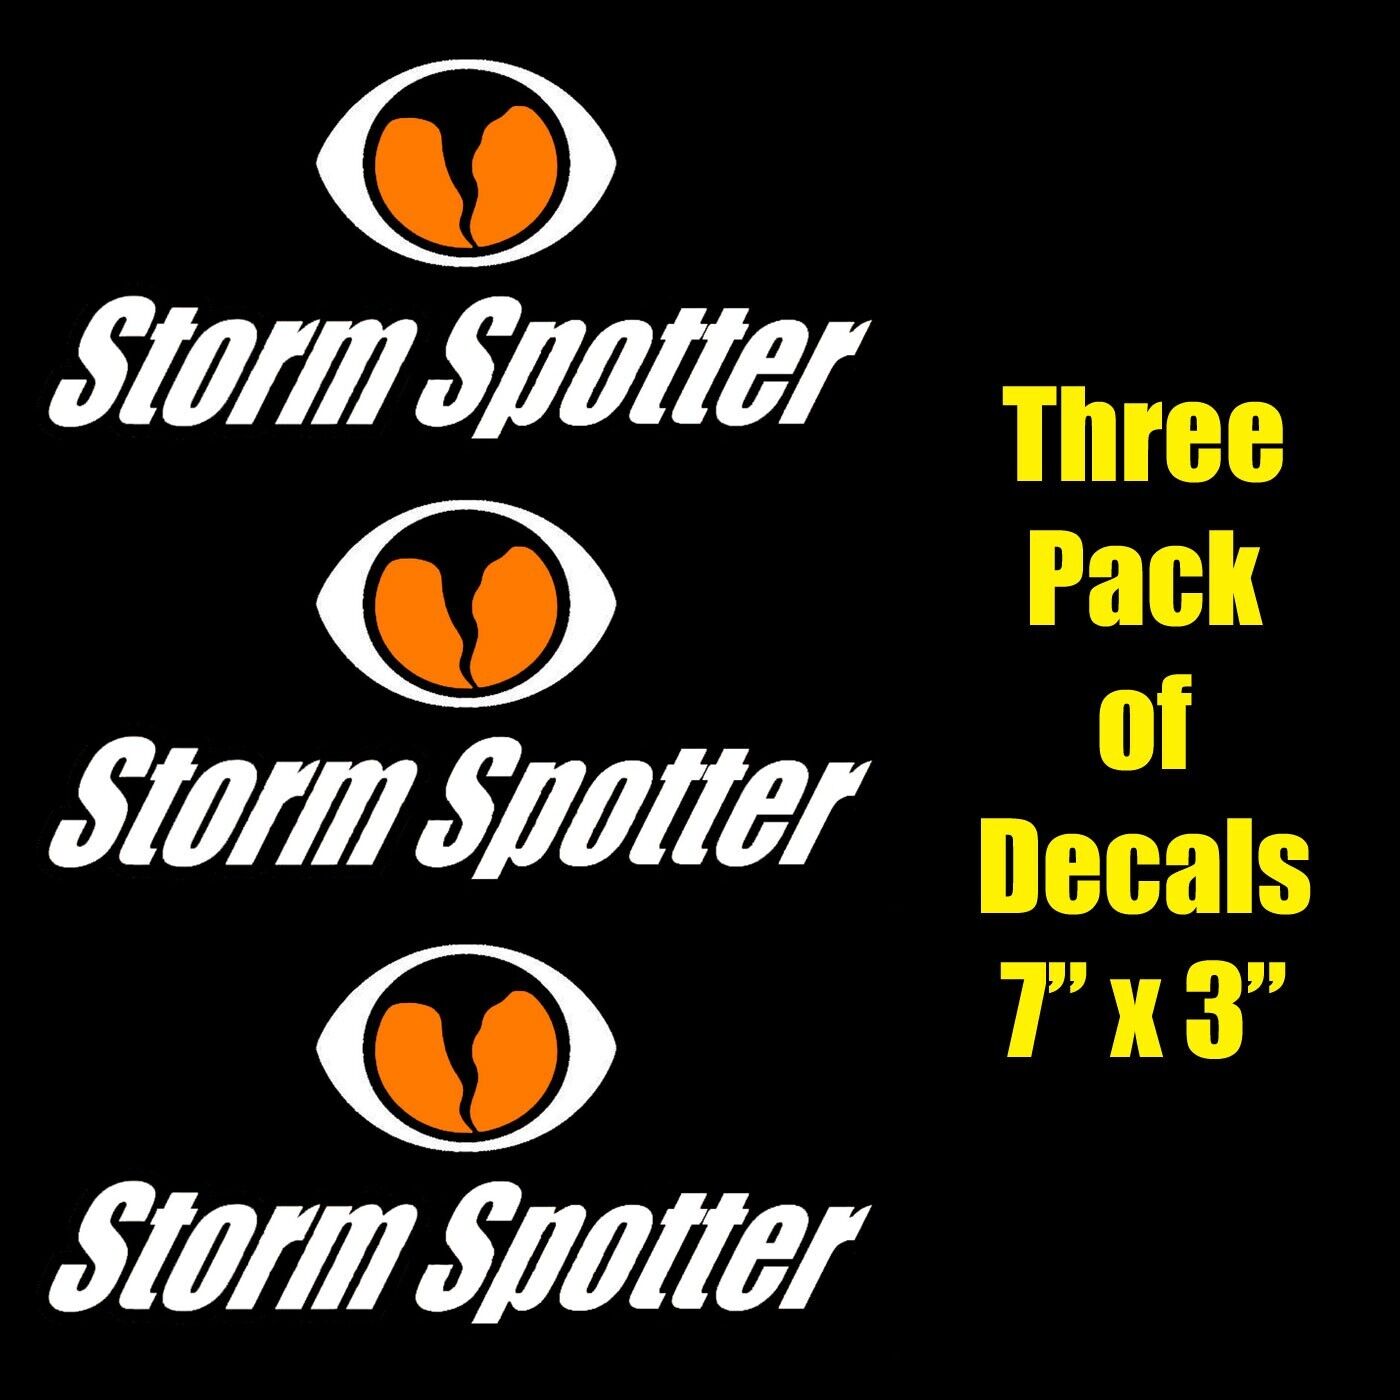 THREE PACK - Storm Spotter Decals - Features the SkyWarn logo, Storm Chaser